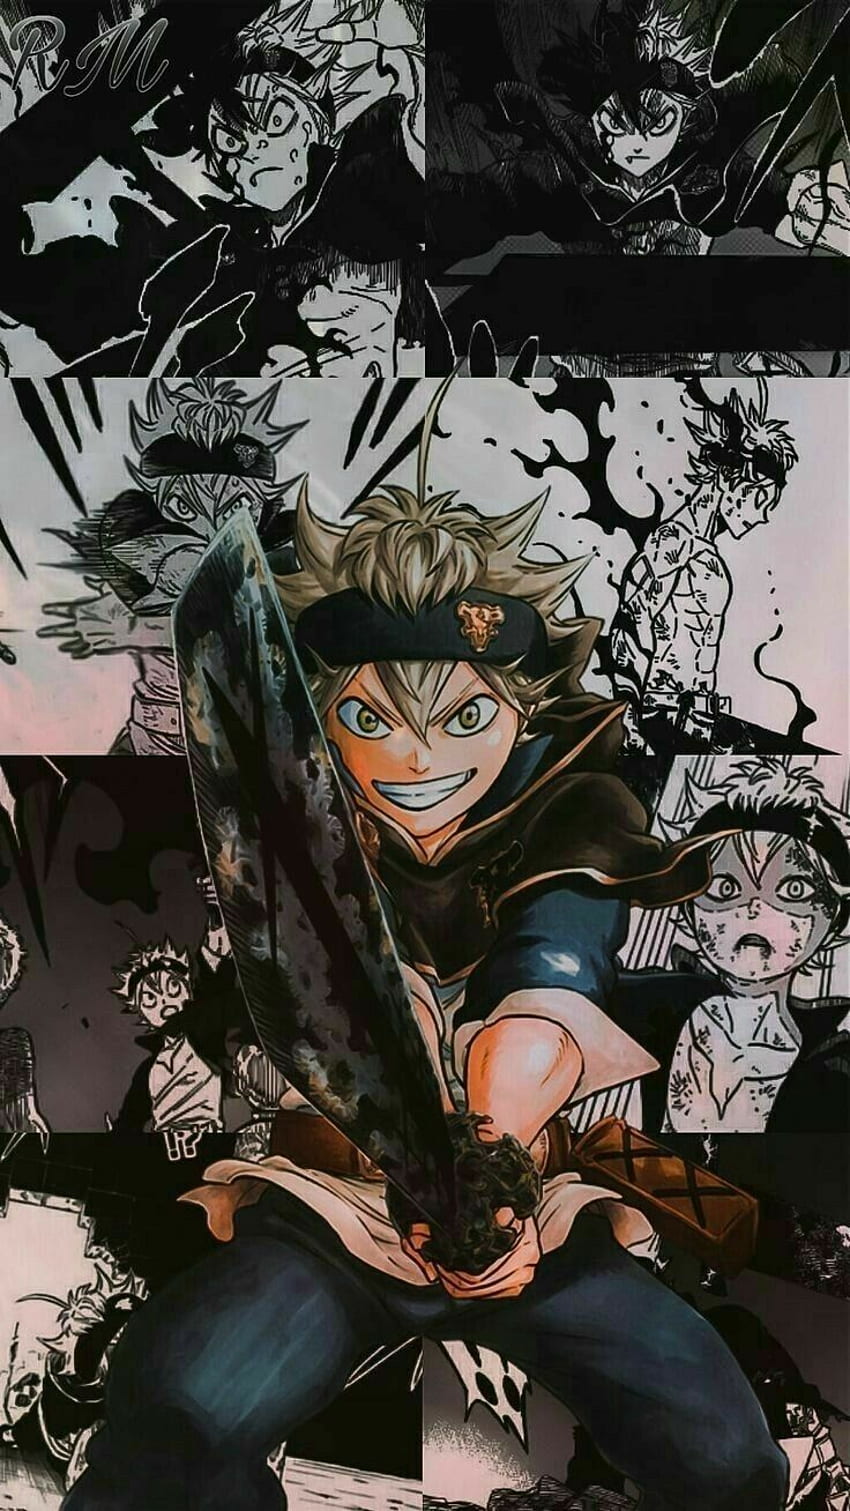 Most Best Anime IPhone Funny Black Clover, Black Clover Anime, Black Clover wallpap. in 2020. Black clover anime, Anime , Black clover manga HD phone wallpaper